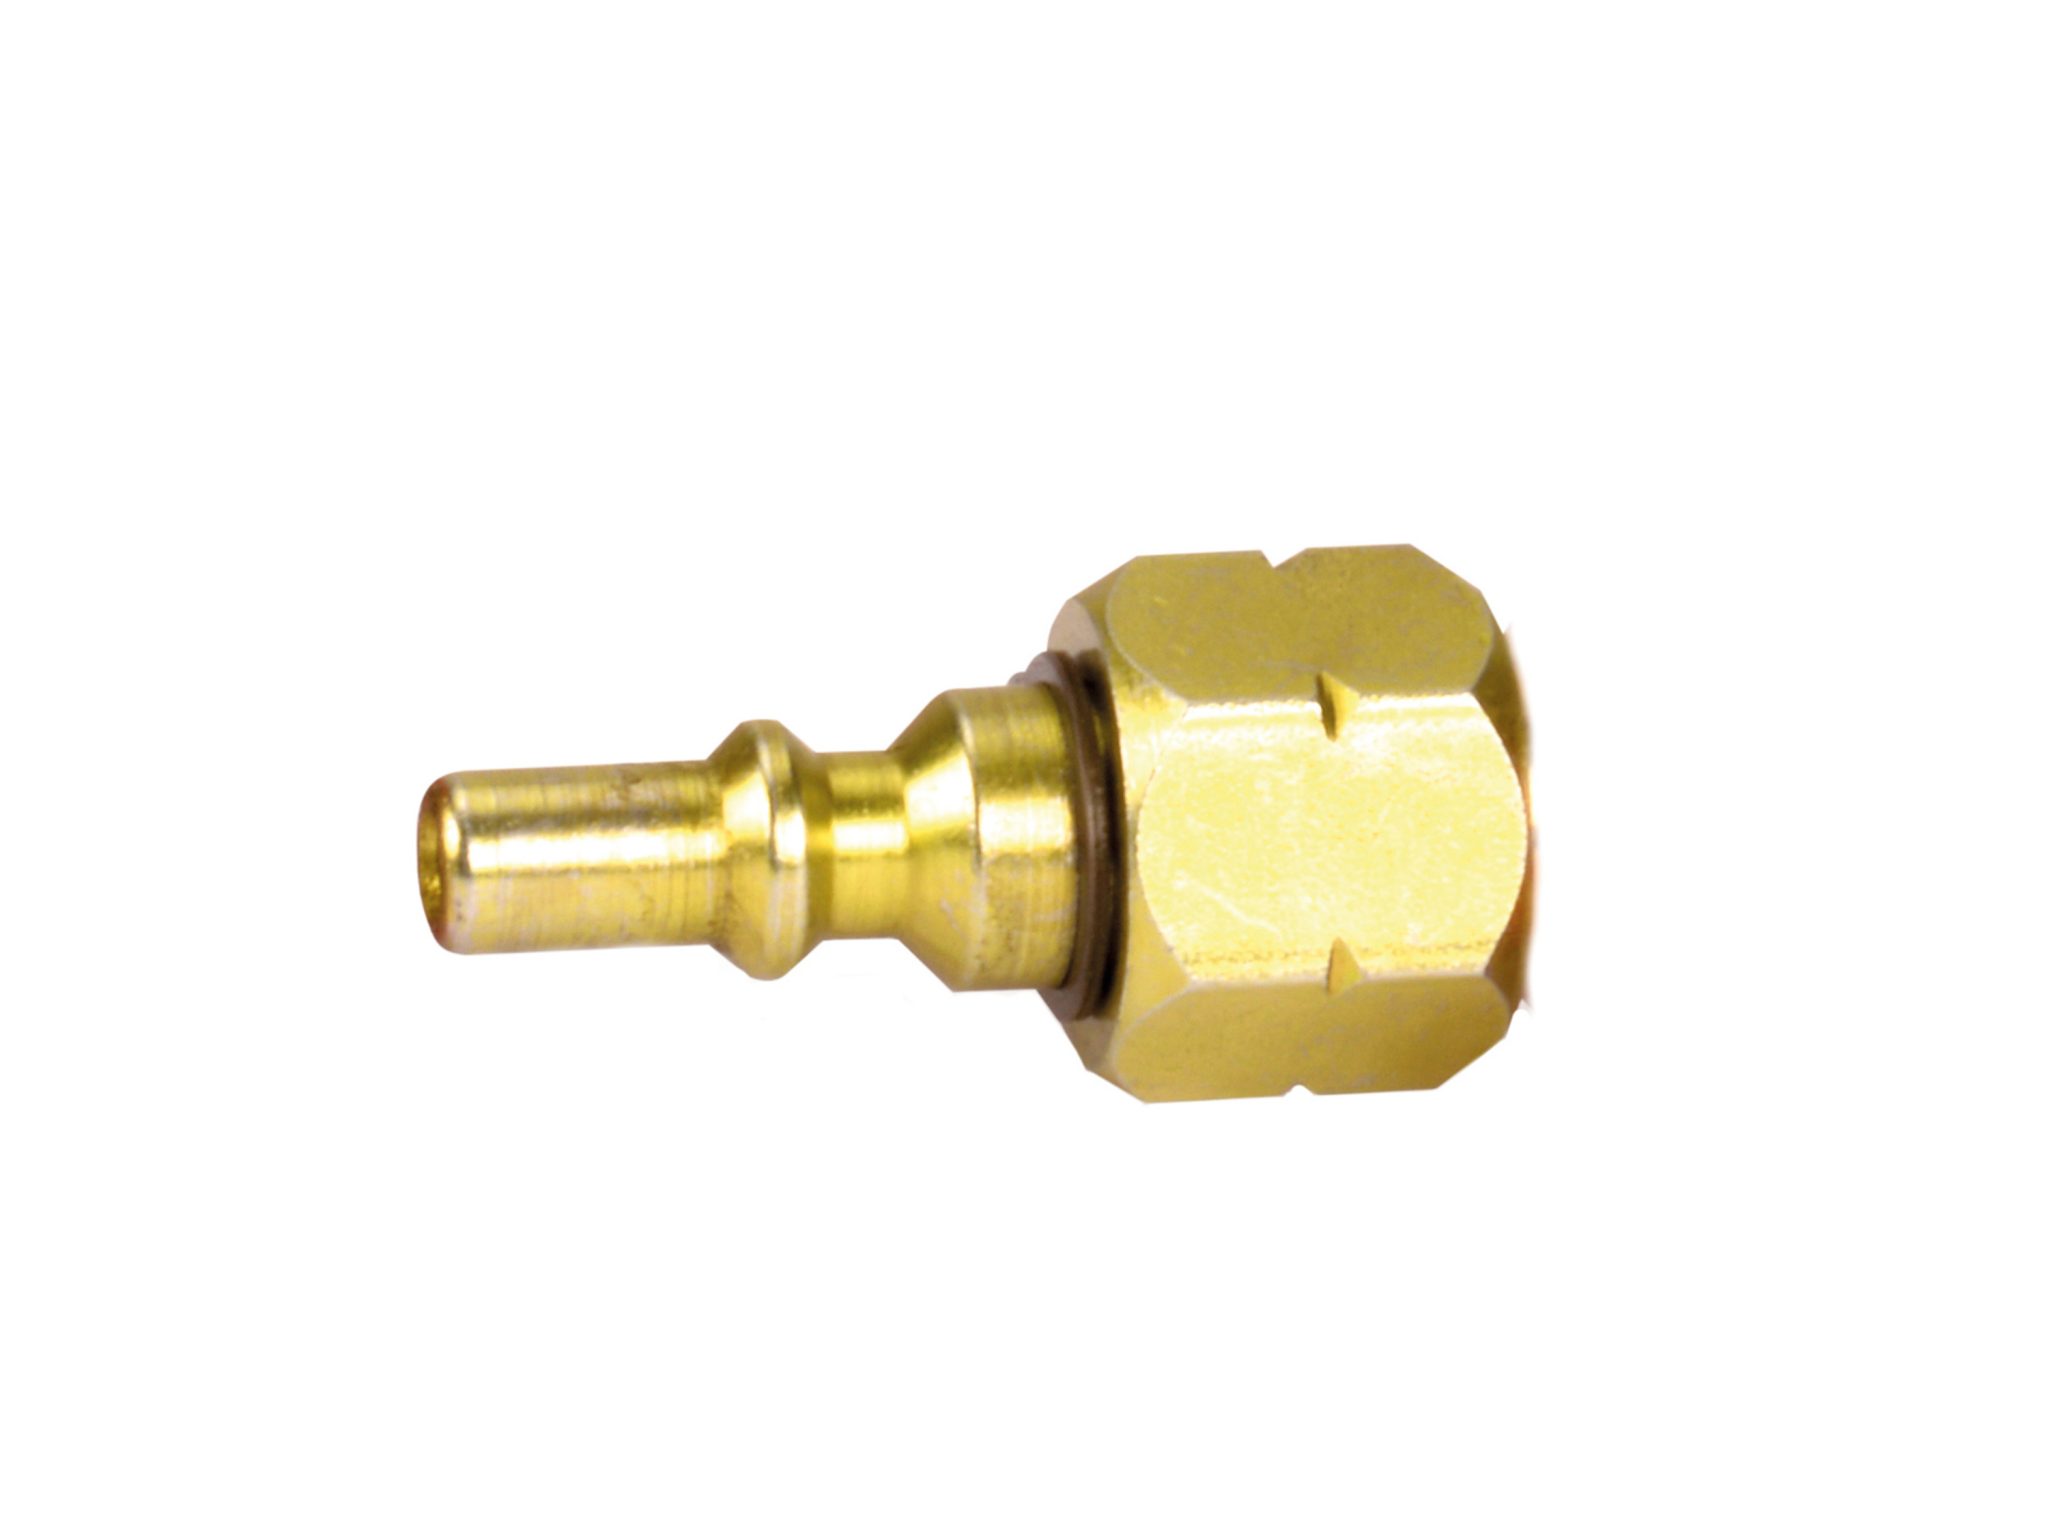 Quick release connector for gas - male end